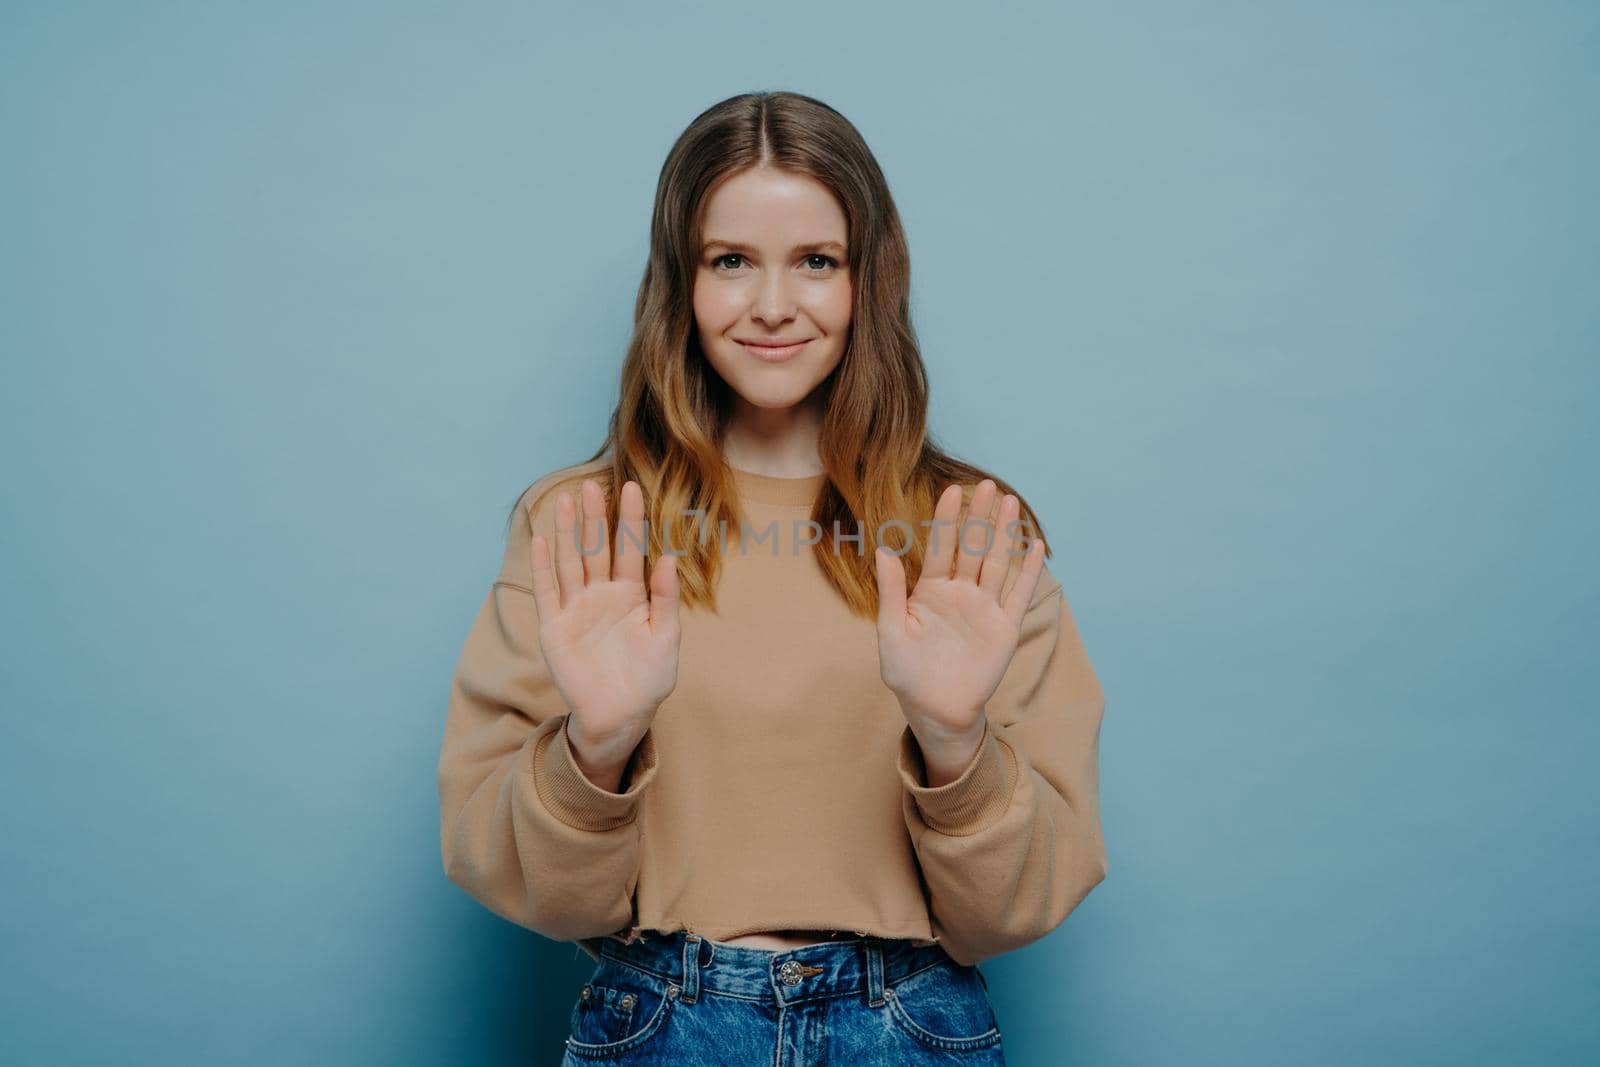 Young woman in beige sweater expressing disagreement, showing it by holding hands in front of her, saying no with her gesture, politely refusing to do what she asked on light blue background